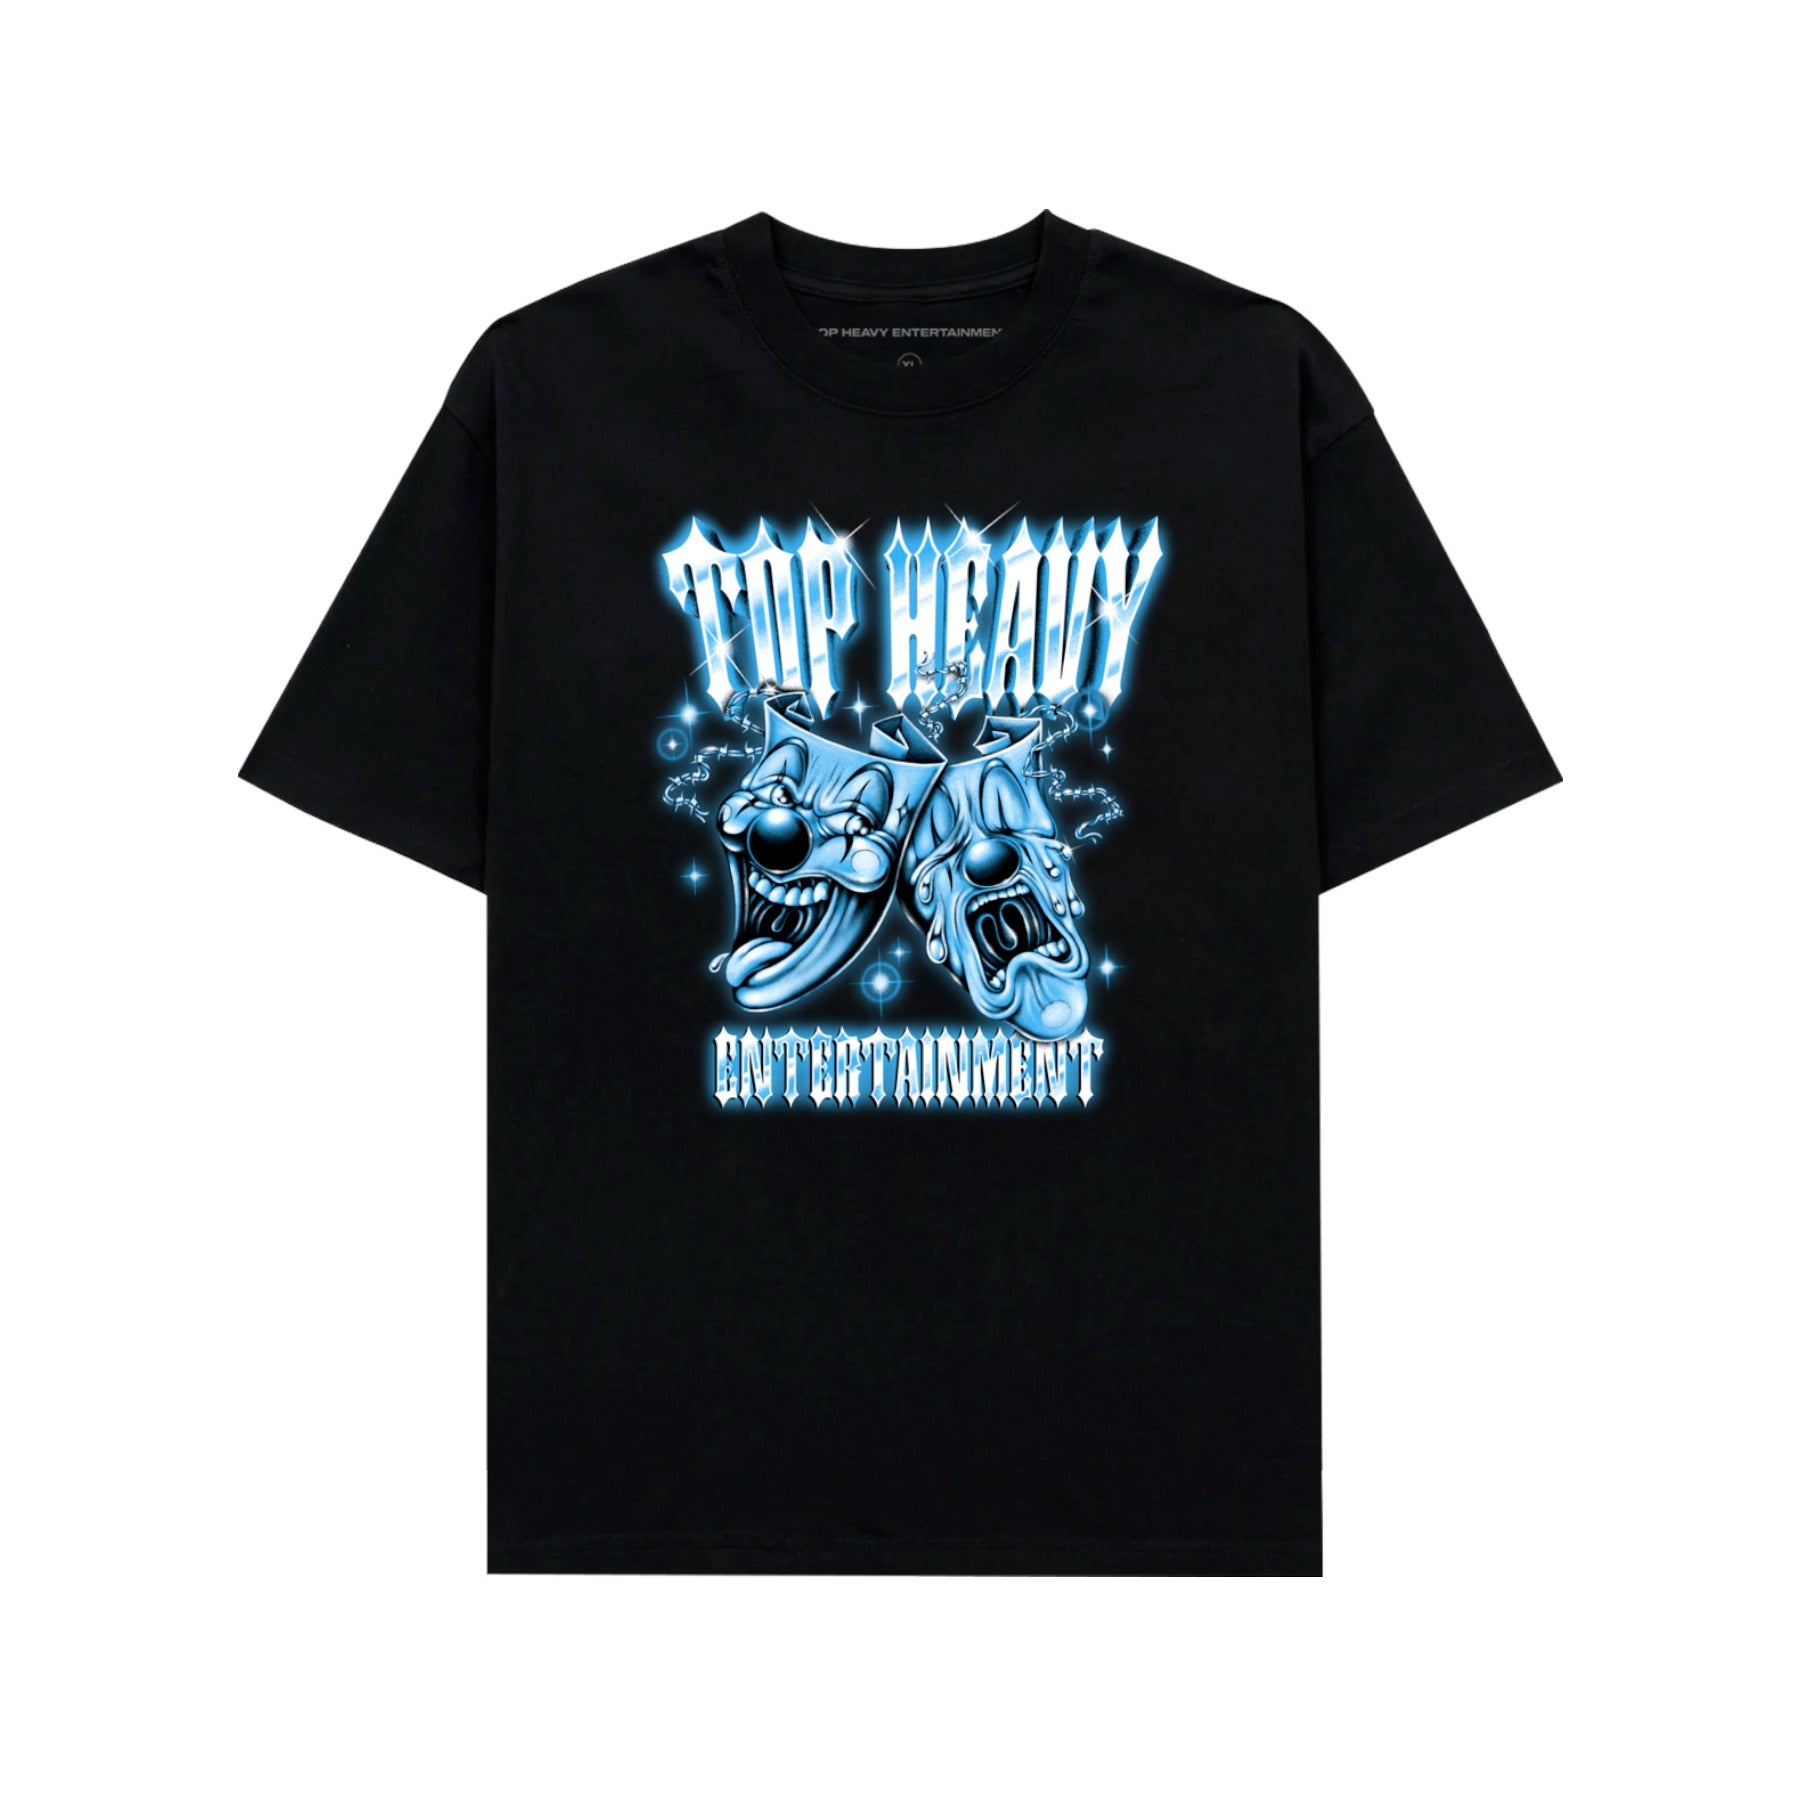 Top Heavy Cry Later S/S Tee - Black